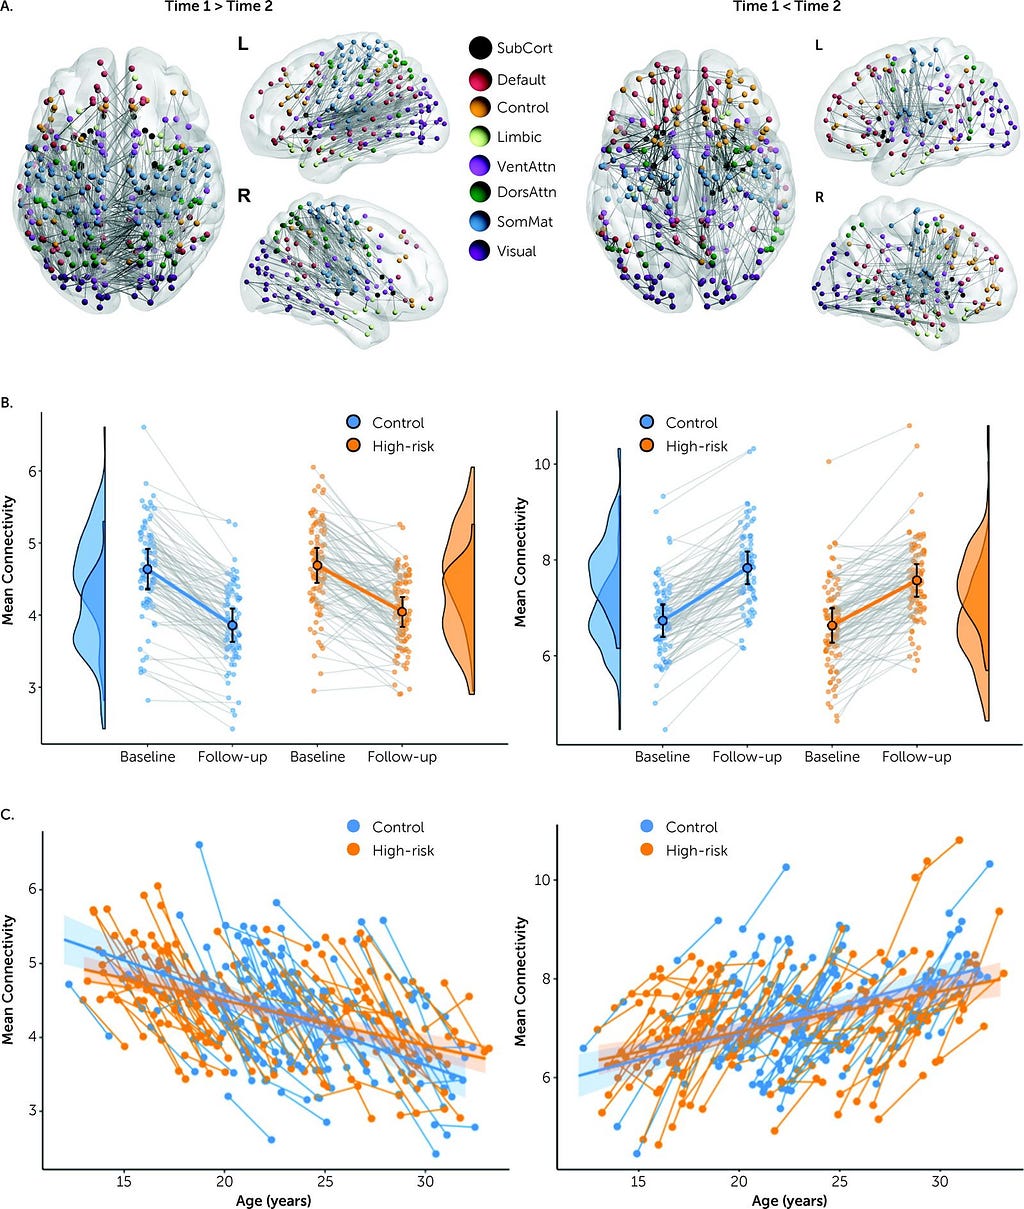 Longitudinal changes in structural connectivity in the brain across both high-risk and control groups.